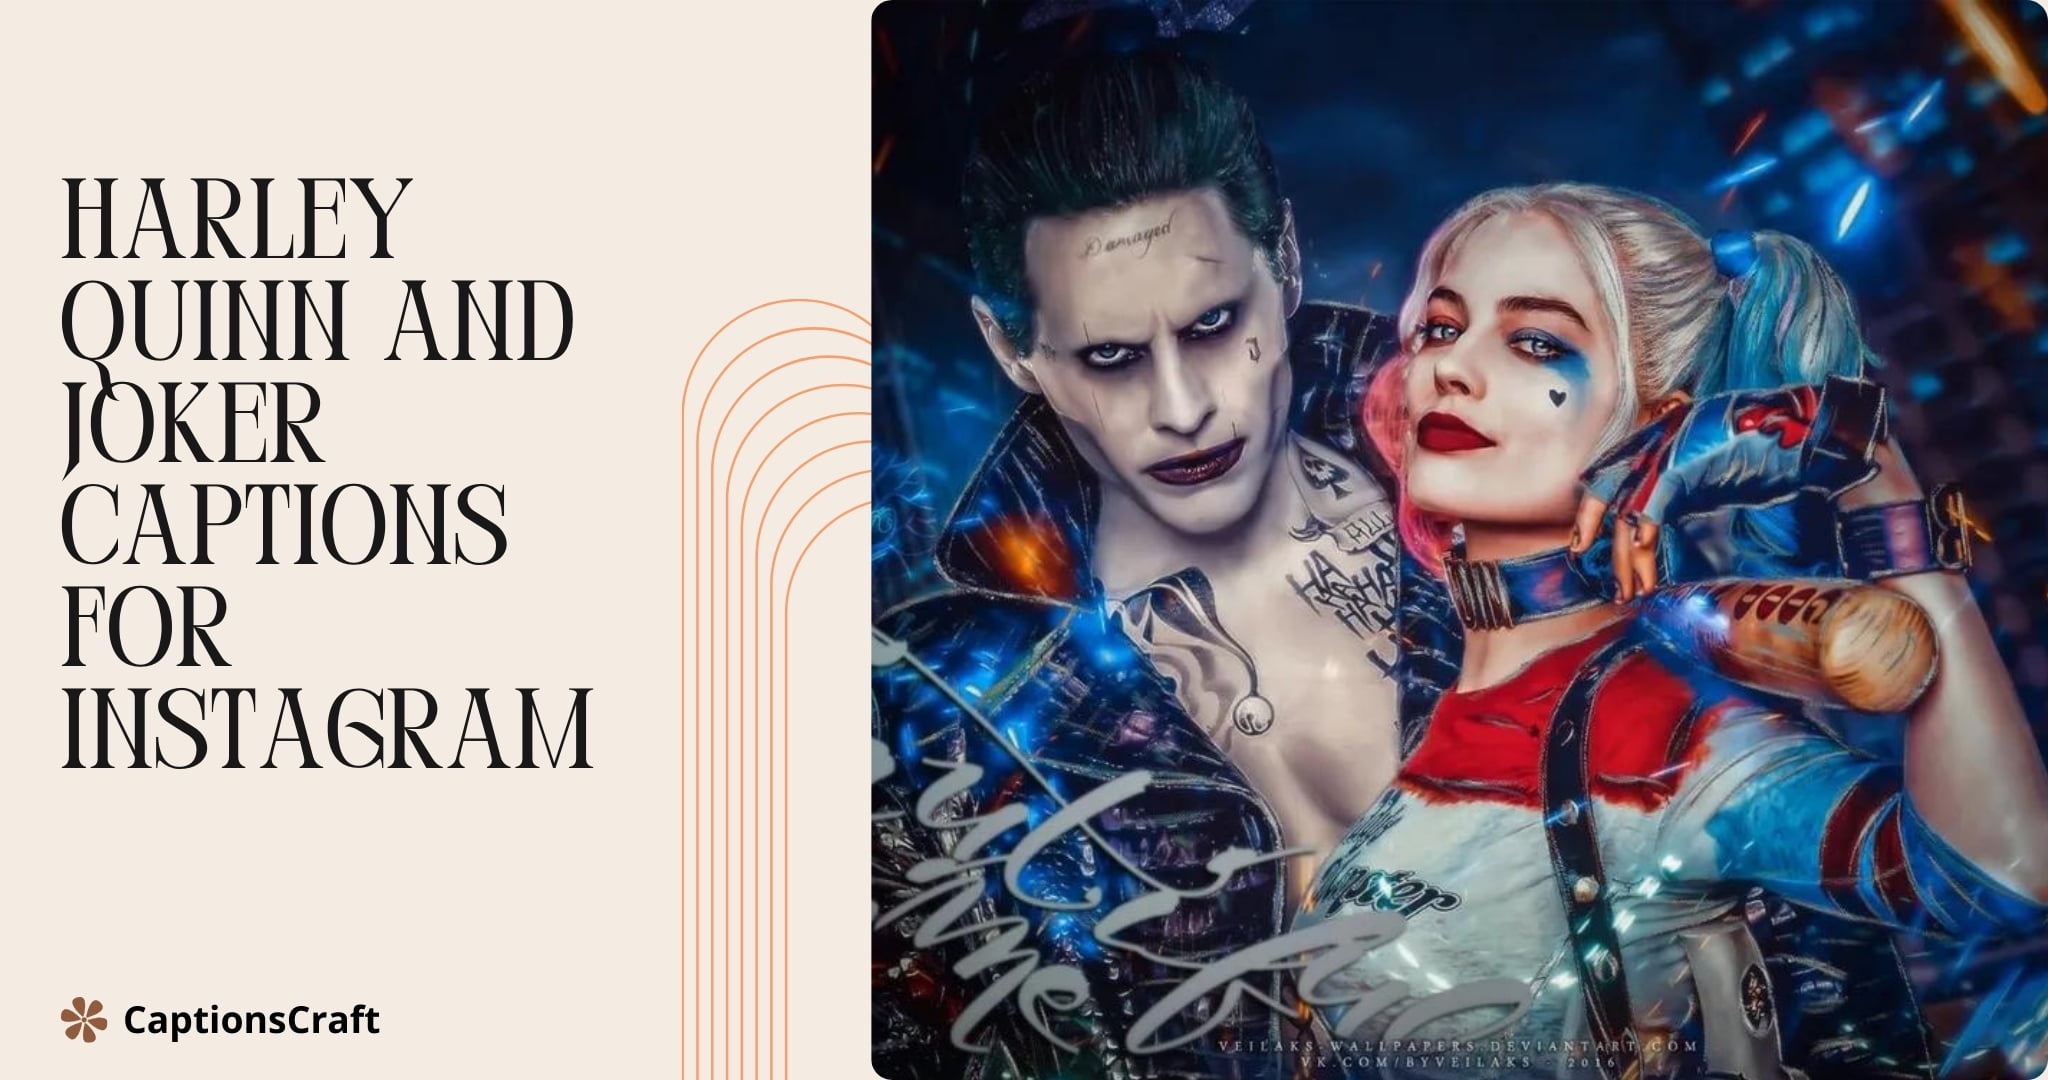 Harley Quinn and Joker: Perfectly twisted couple. Captions for Instagram that capture their chaotic love. #HarleyQuinn #Joker #InstagramCaptions